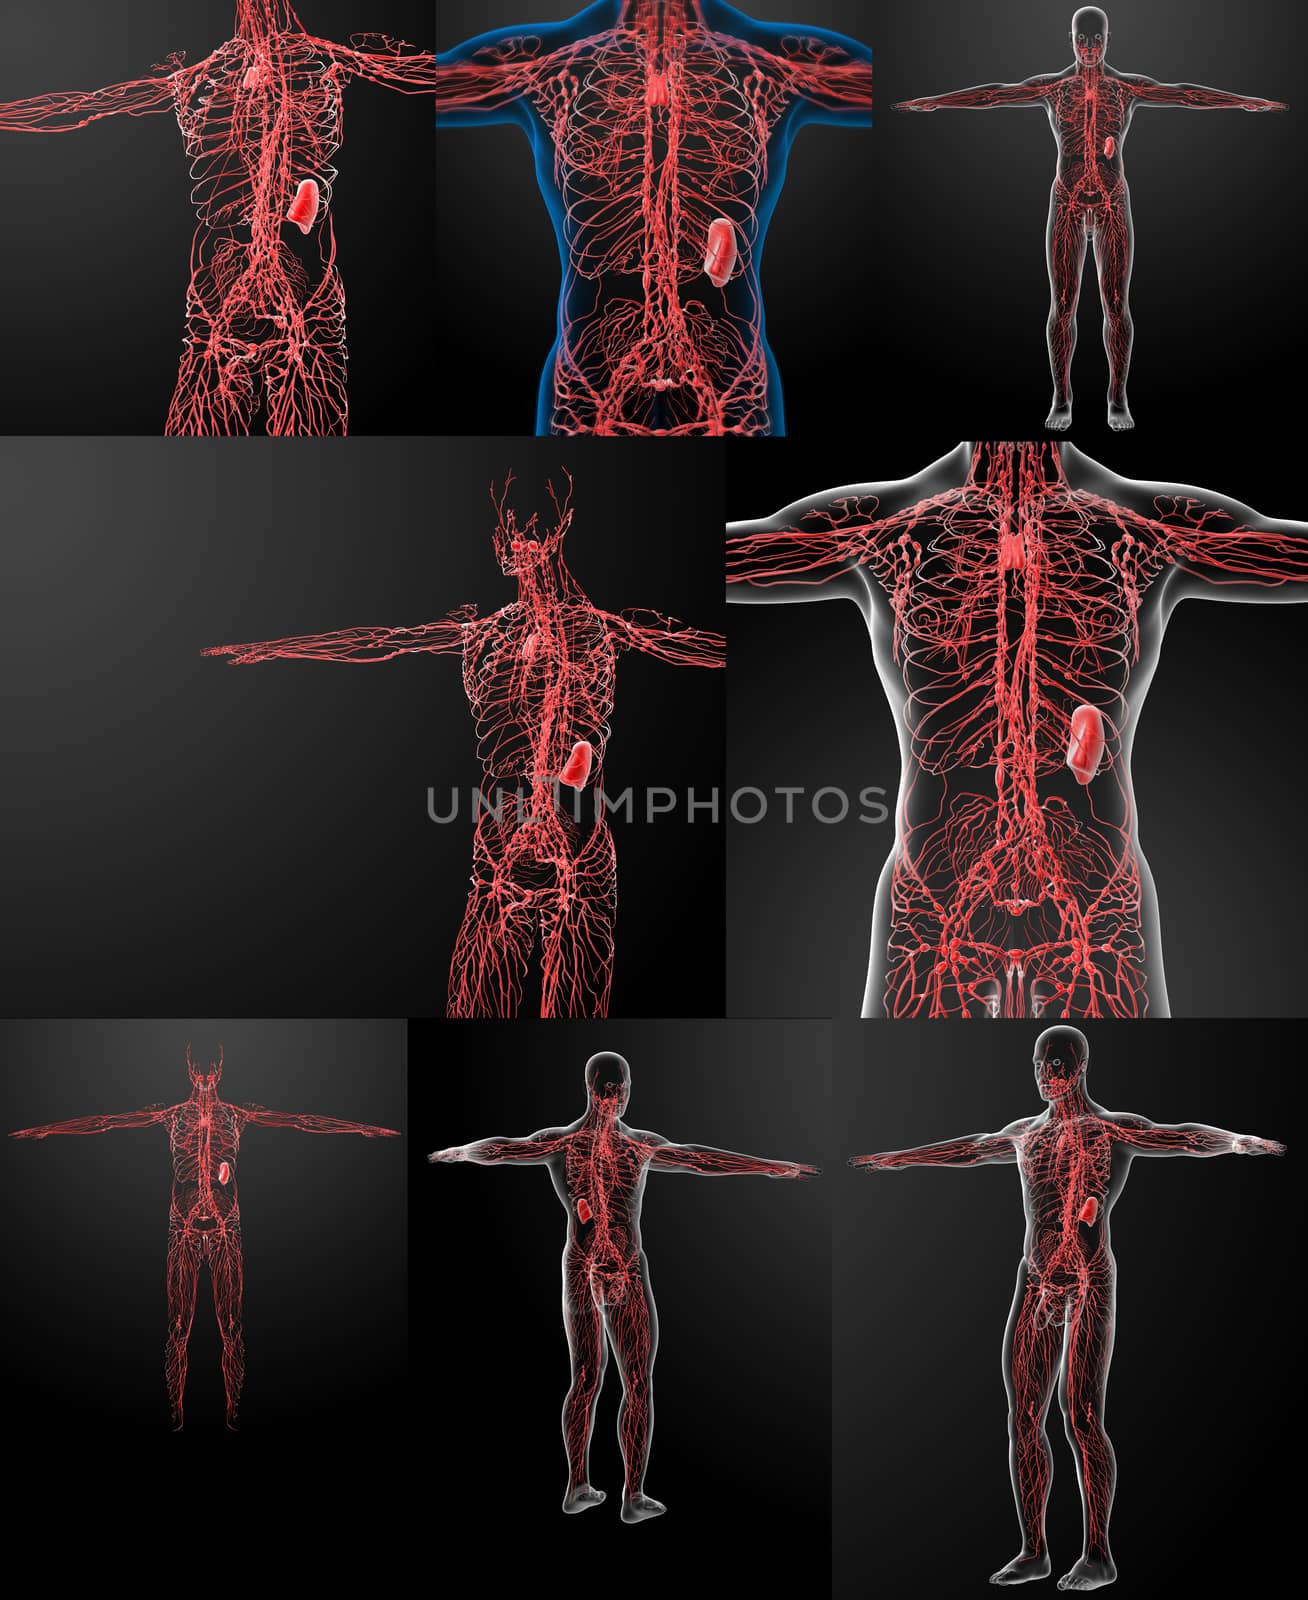 3D rendering of the lymphatic system